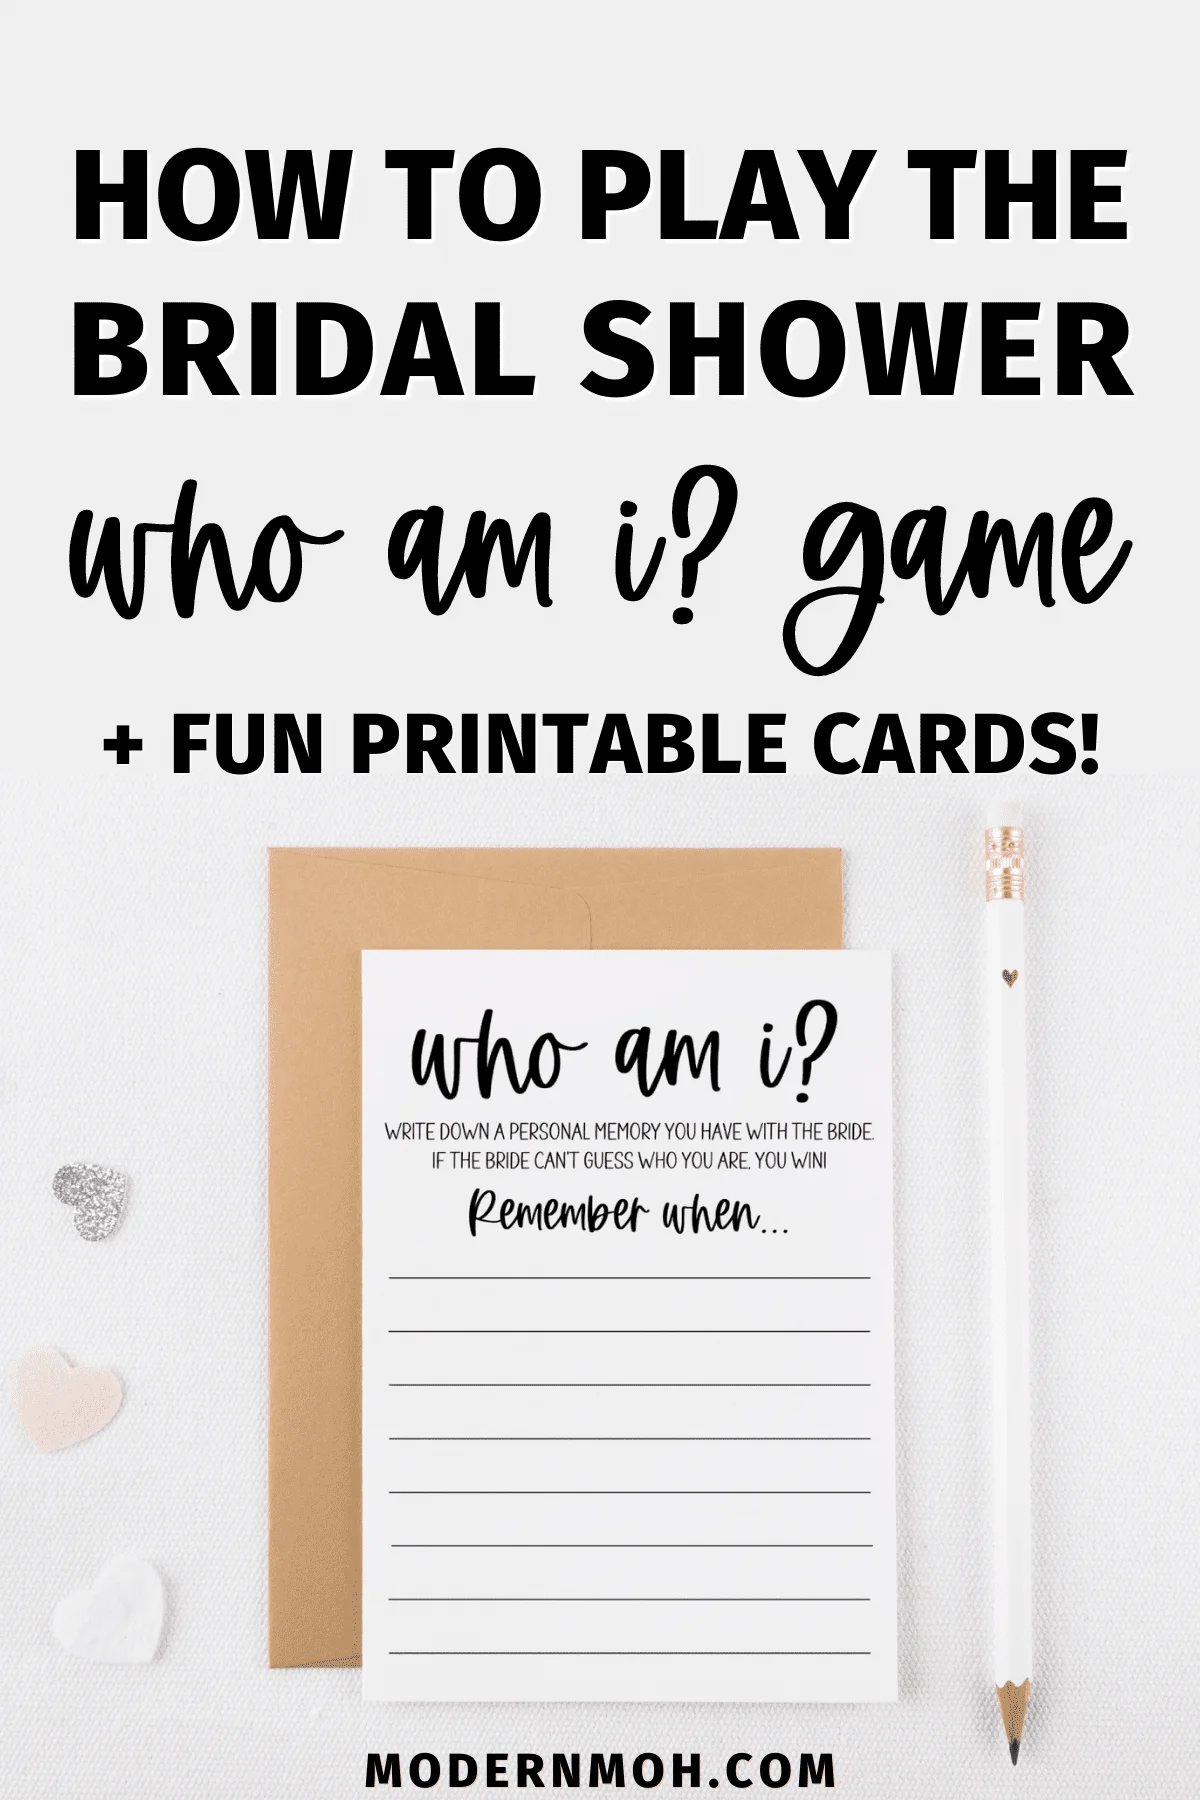 Who Am I Bridal Shower Game: How to Play + Printable Cards